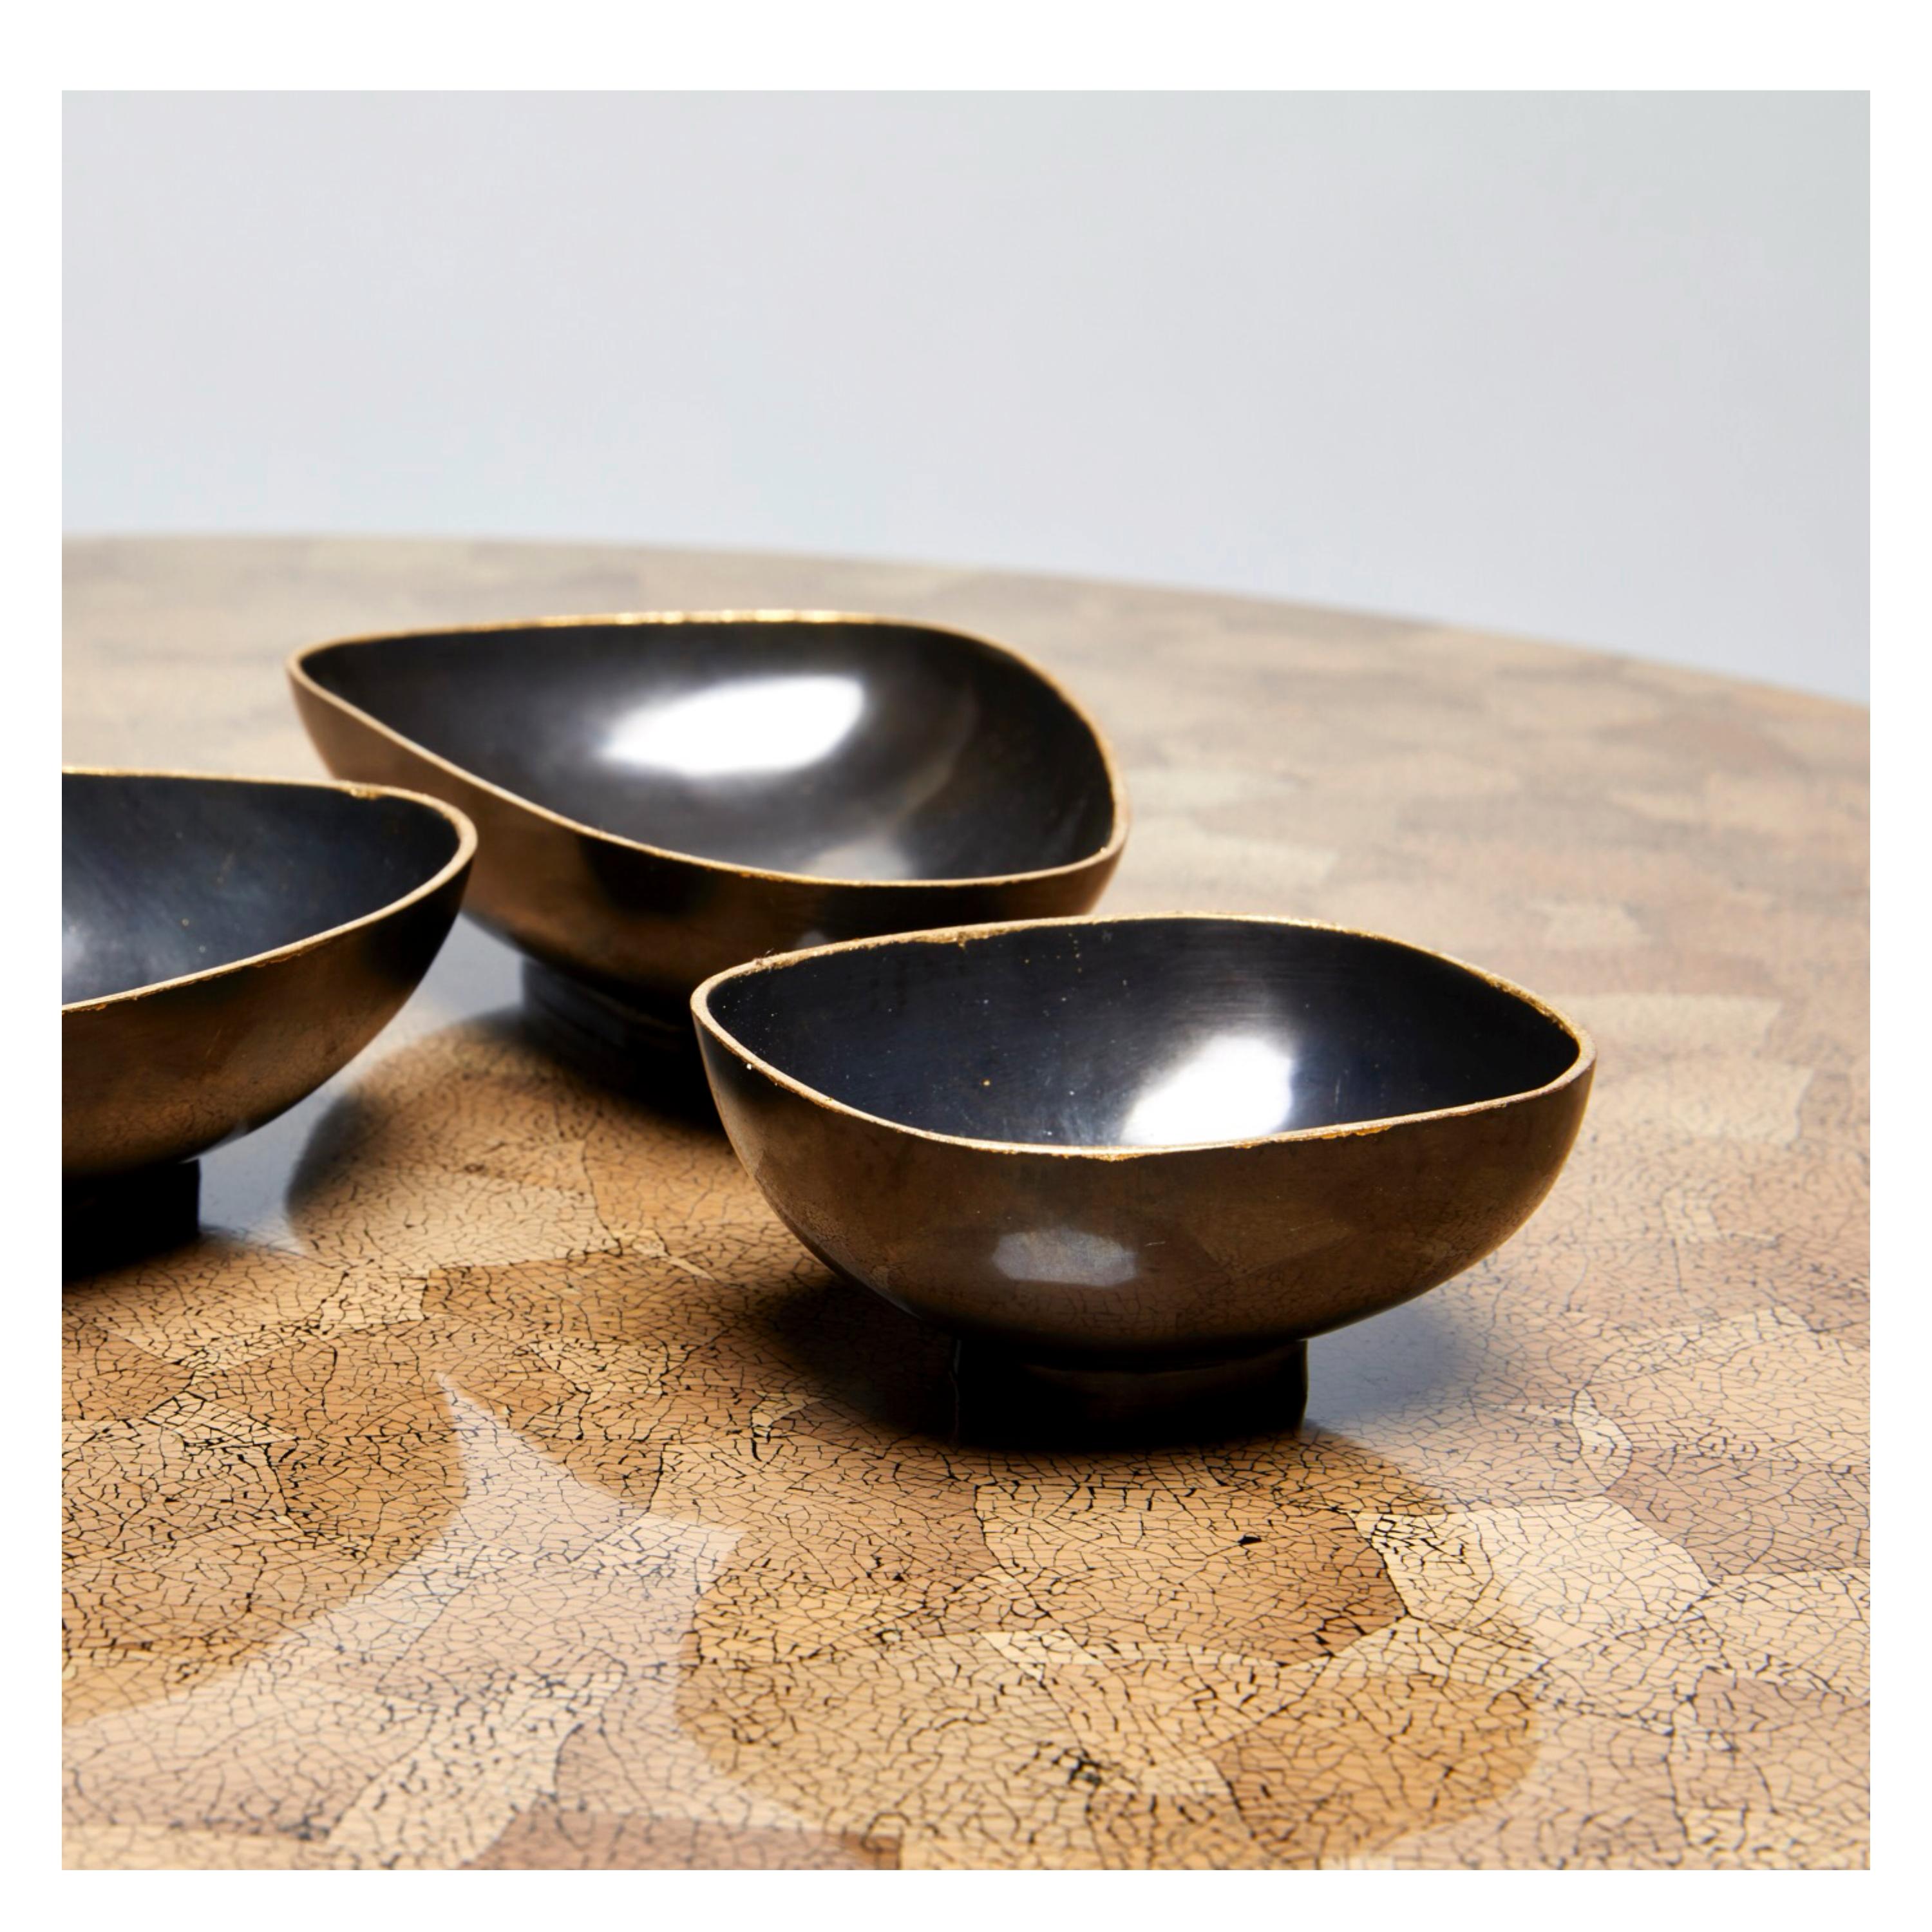 Minimalist Decorative Cups, PEBBLES, Bronze and Gold by Reda Amalou Design, 2016 For Sale